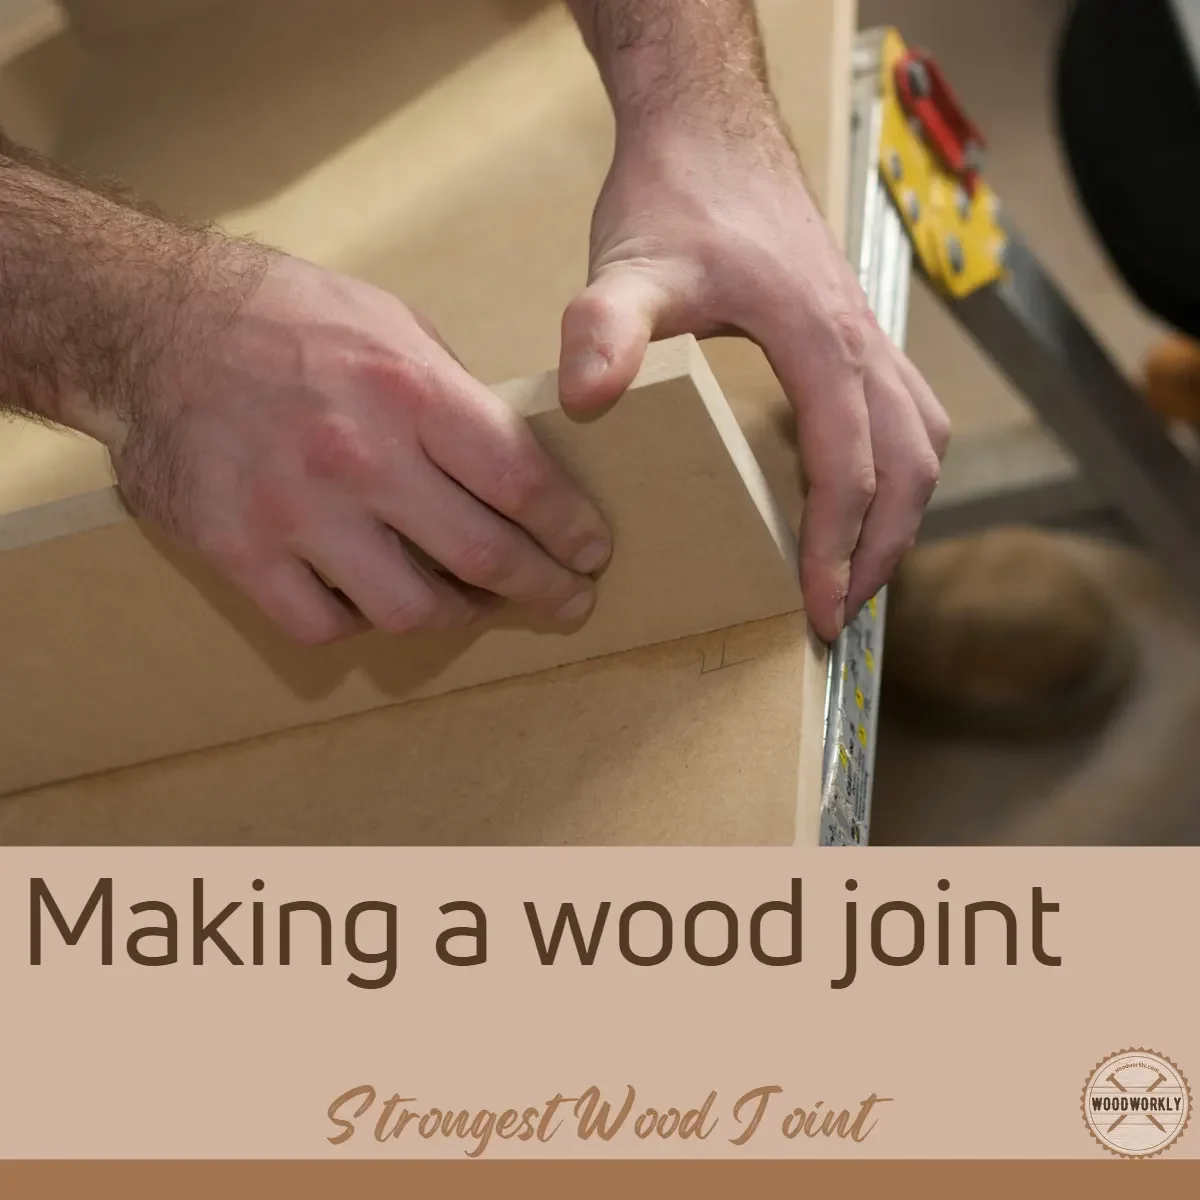 Making a wood joint